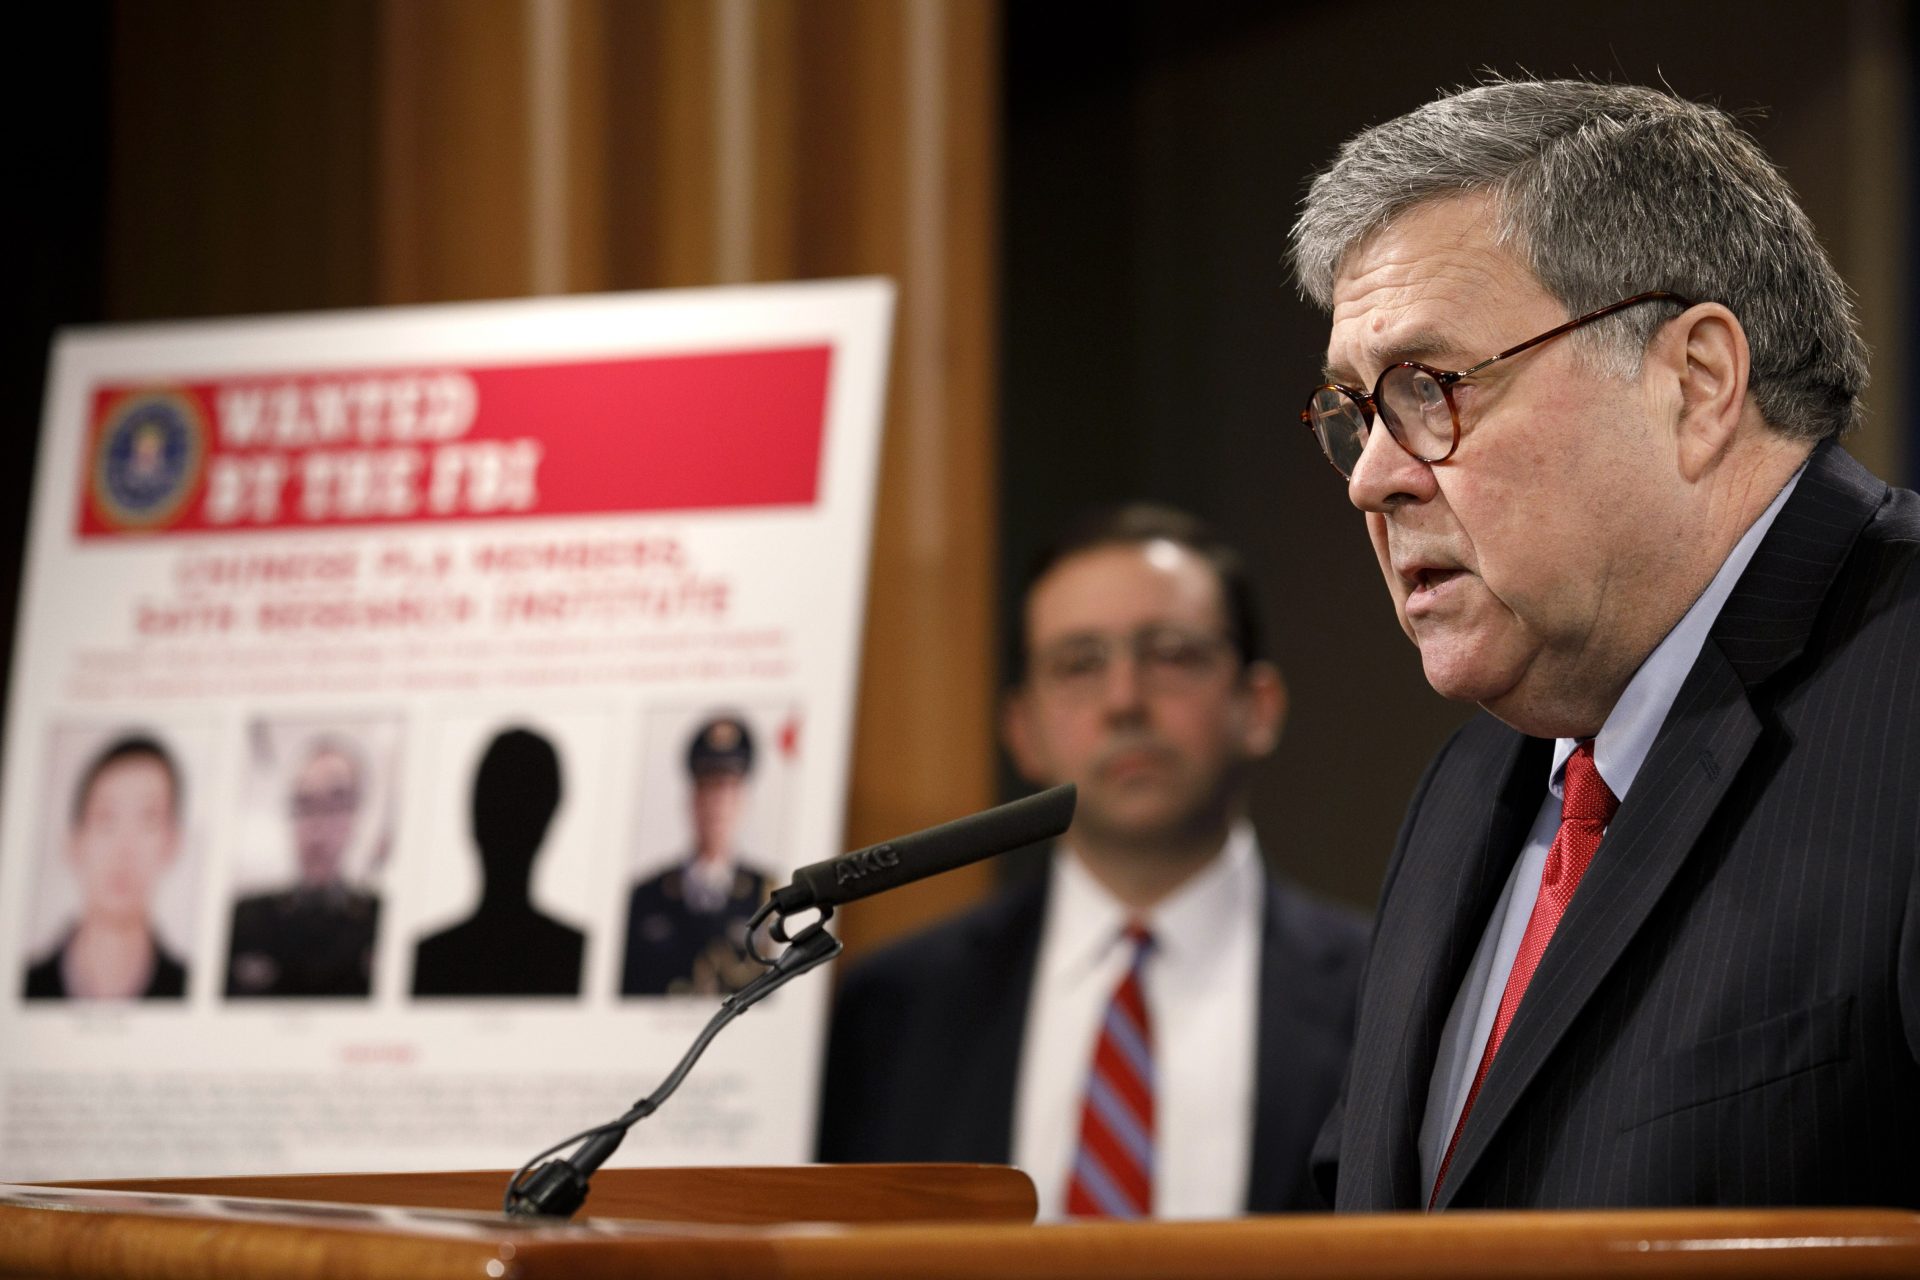 Attorney General William Barr speaks during a news conference, Monday, Feb. 10, 2020, at the Justice Department in Washington, as Principal Associate Deputy Attorney General Seth Ducharm looks on. Four members of the Chinese military have been charged with breaking into the networks of the Equifax credit reporting agency and stealing the personal information of tens of millions of Americans, the Justice Department said Monday, blaming Beijing for one of the largest hacks in history.